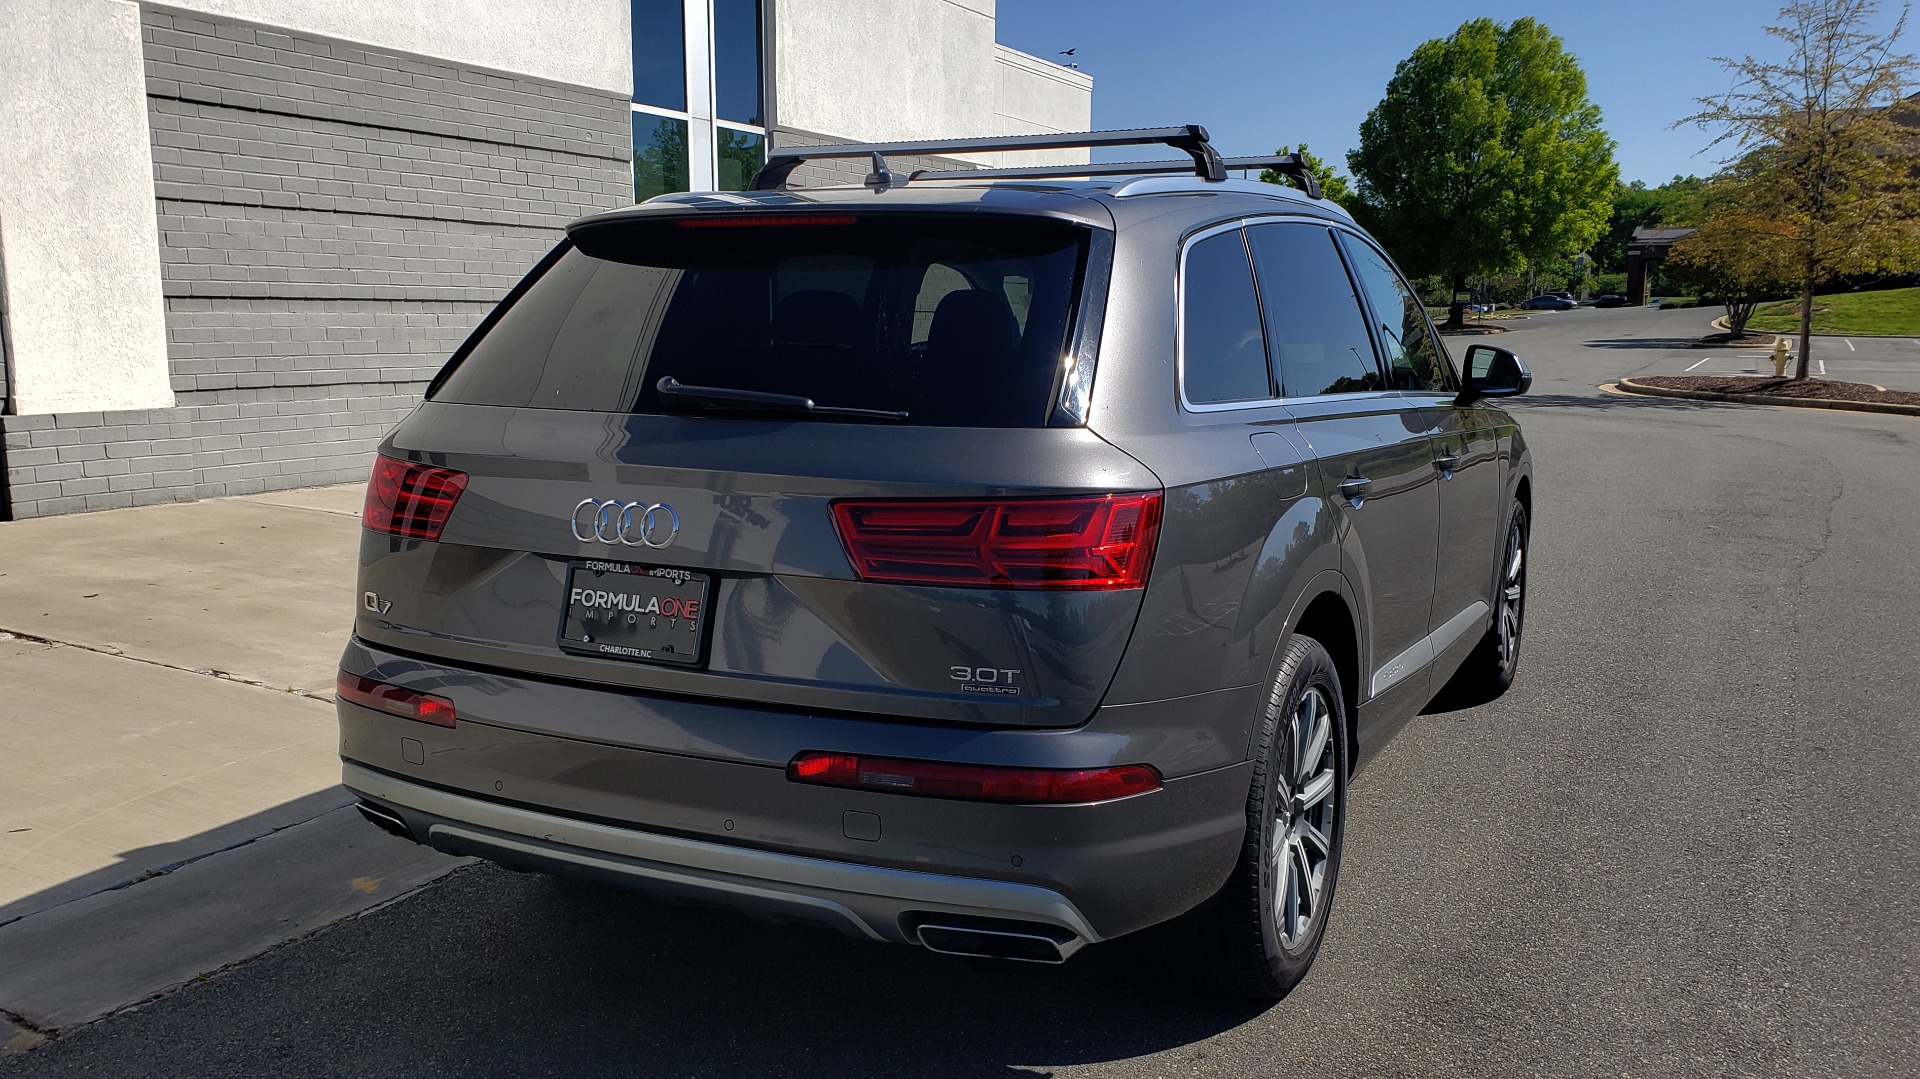 Used 2018 Audi Q7 PREMIUM PLUS TIPTRONIC / NAV / SUNROOF / VISION PKG / CLD WTHR / REARVIEW for sale Sold at Formula Imports in Charlotte NC 28227 7